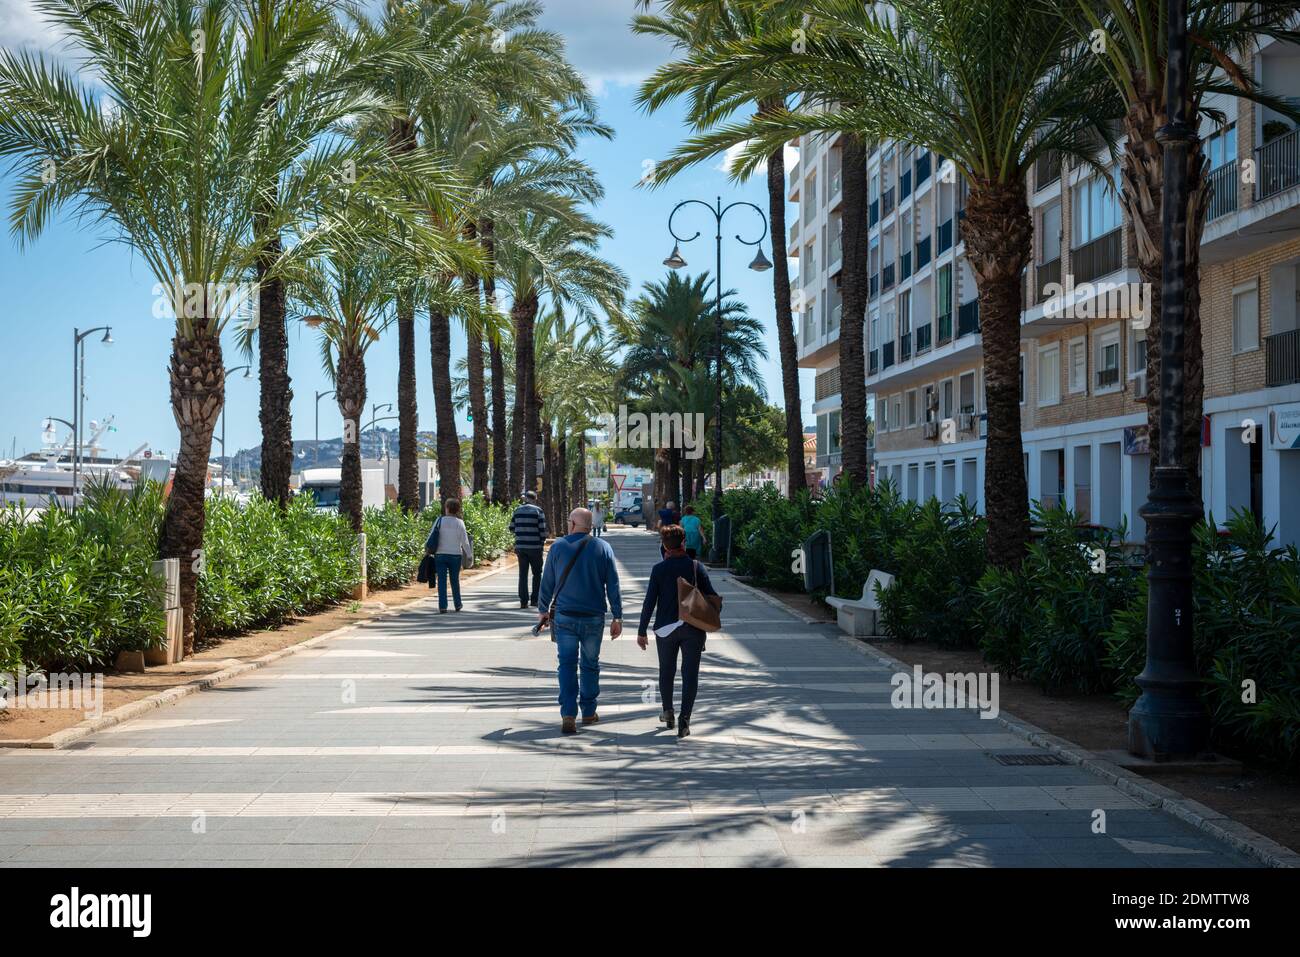 Denia, Costa Blanca, Alicante, Spain.People walk along a footpath lined by palm trees in the Mediterranean coastal town. Stock Photo